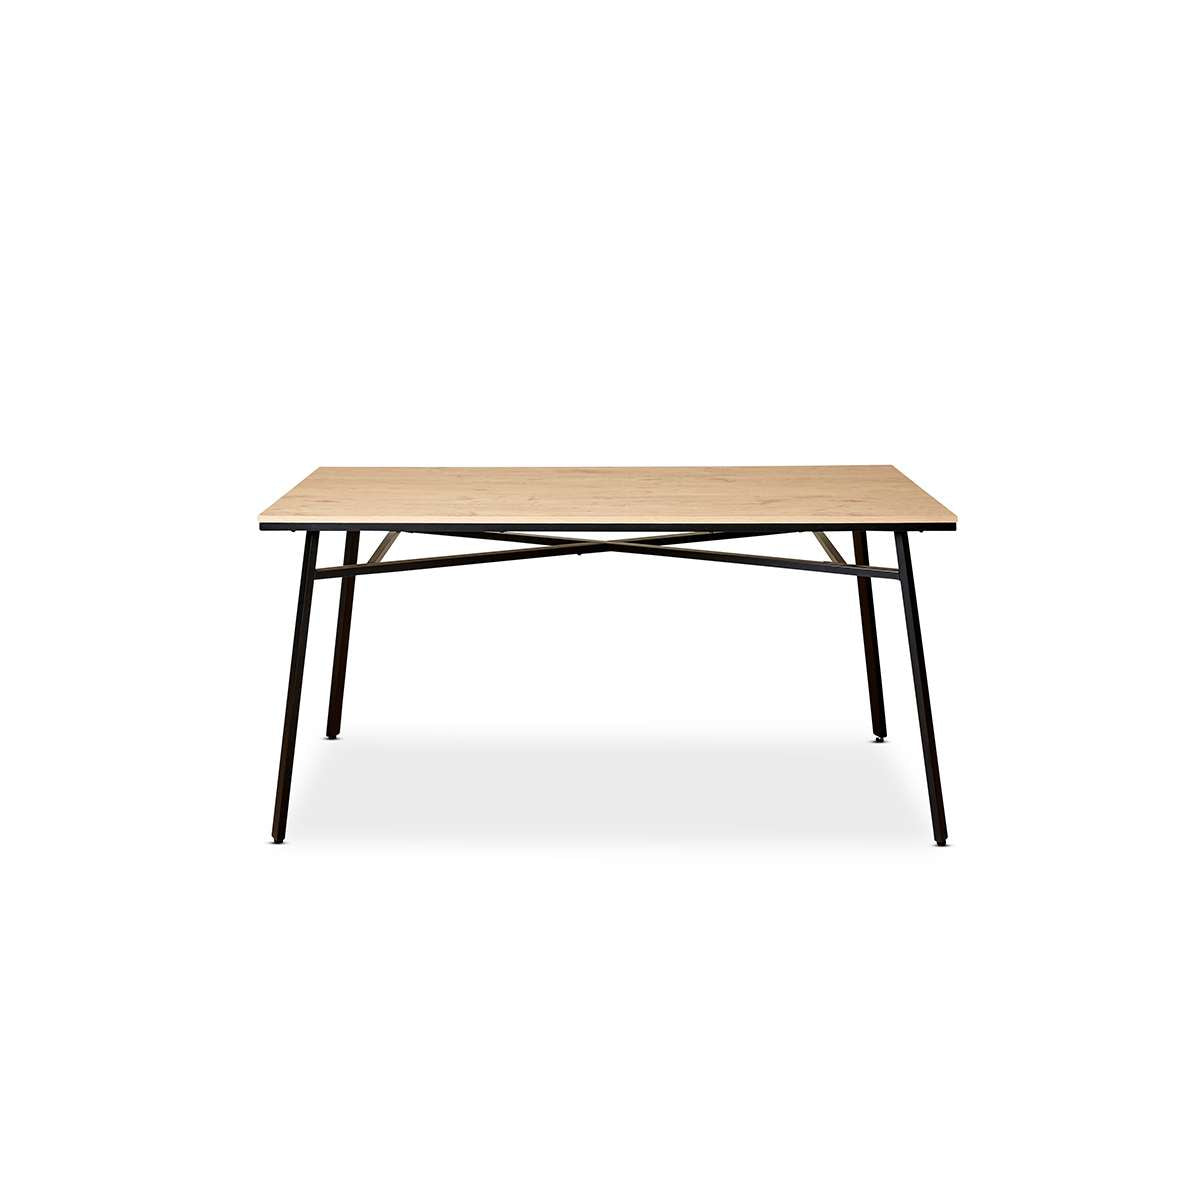 Reese 6 Seater Dining Table - Black